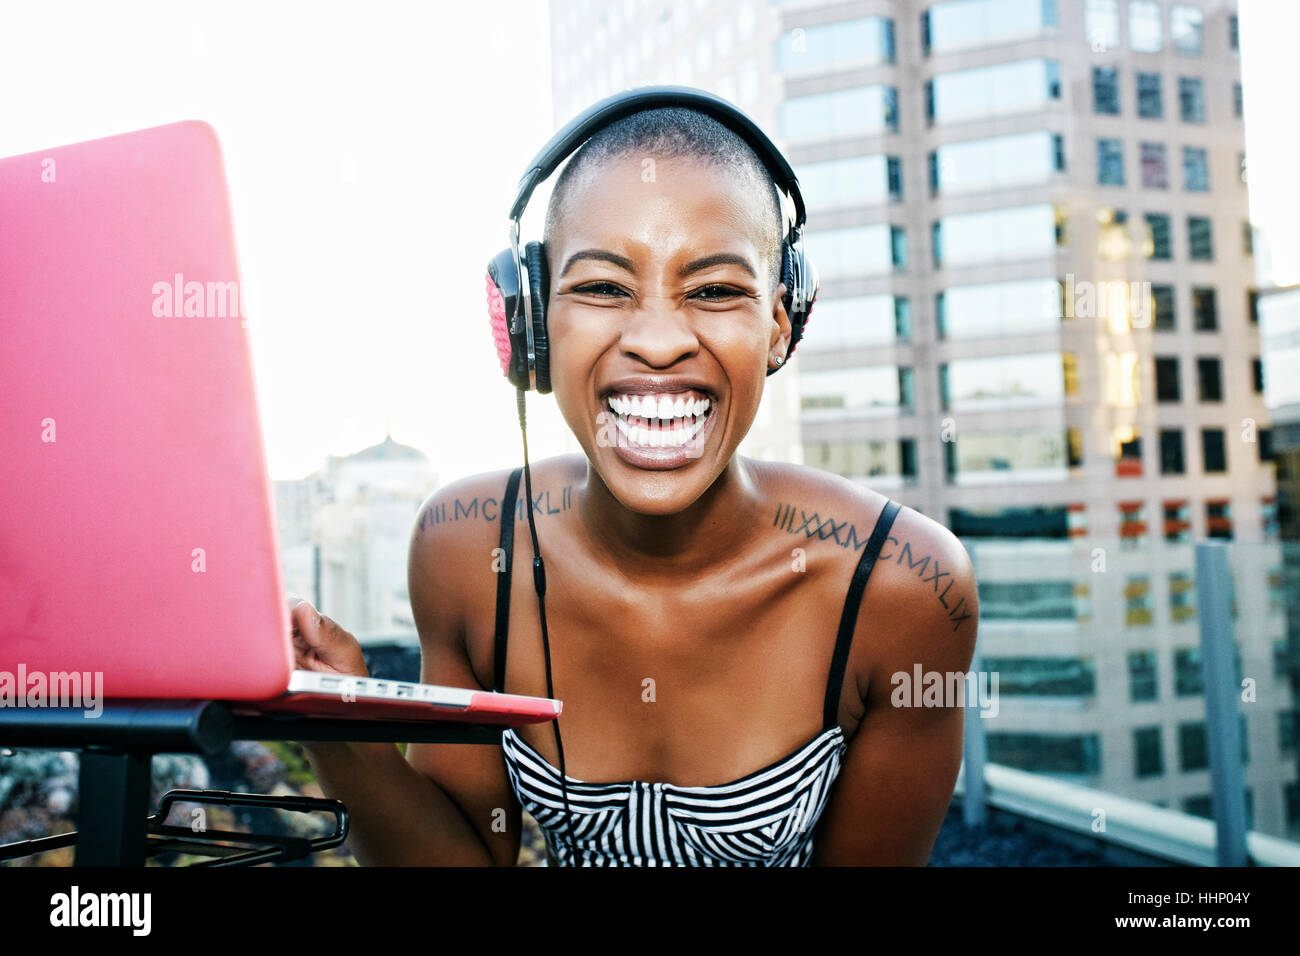 Portrait of Black DJ laughing on urban rooftop Stock Photo